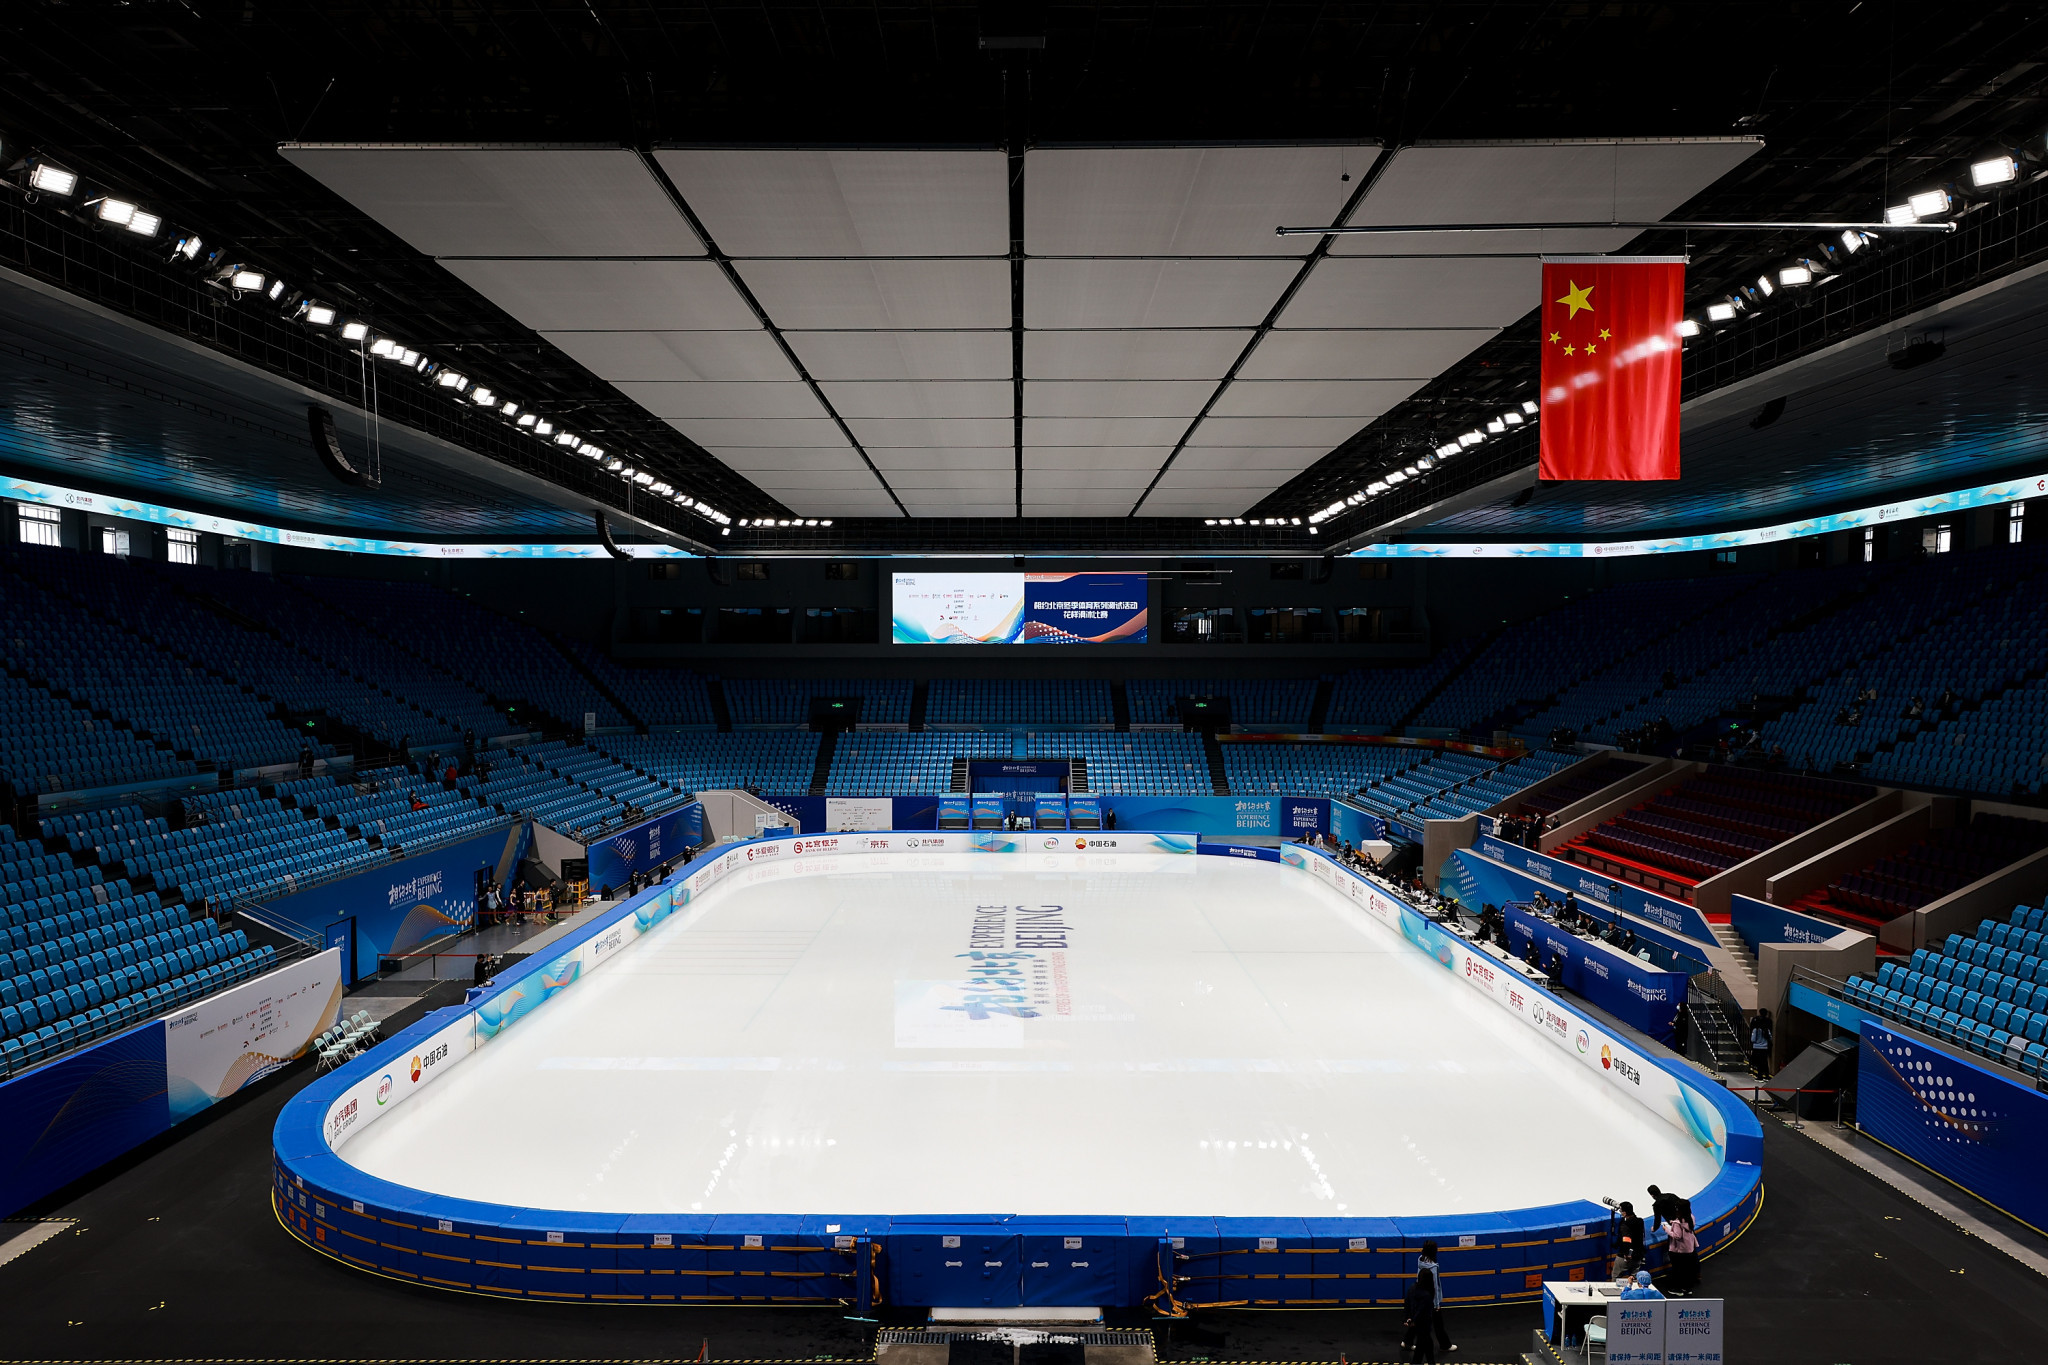 The Capital Indoor Stadium in Beijing is set to host figure skating competition at the Winter Olympics, which begin less than two weeks after the ISU Four Continents Figure Skating Championships 2022 were initially scheduled for ©Getty Images